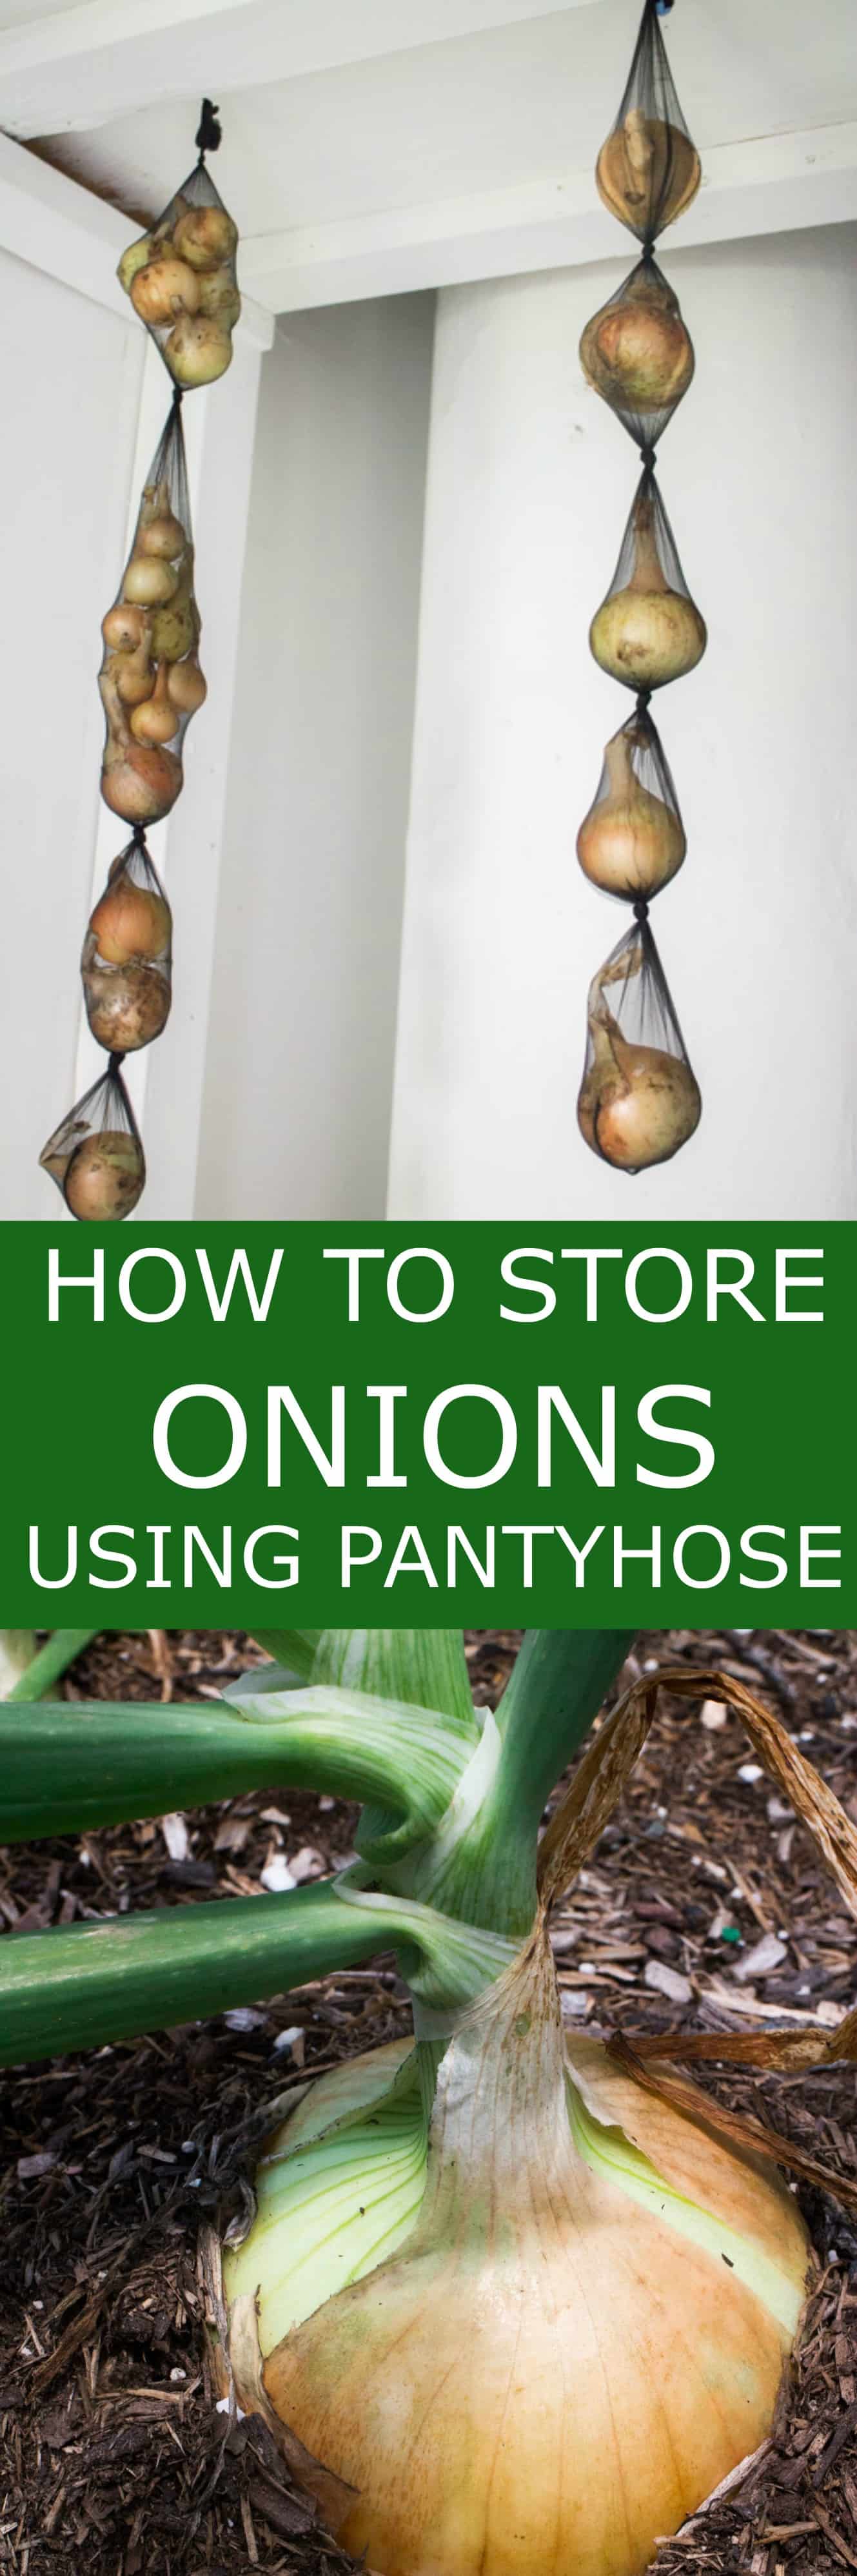 How To Store Onions Using Pantyhose.  This is a great and cheap way to store onions to make them last for months. Follow these step by step instructions!